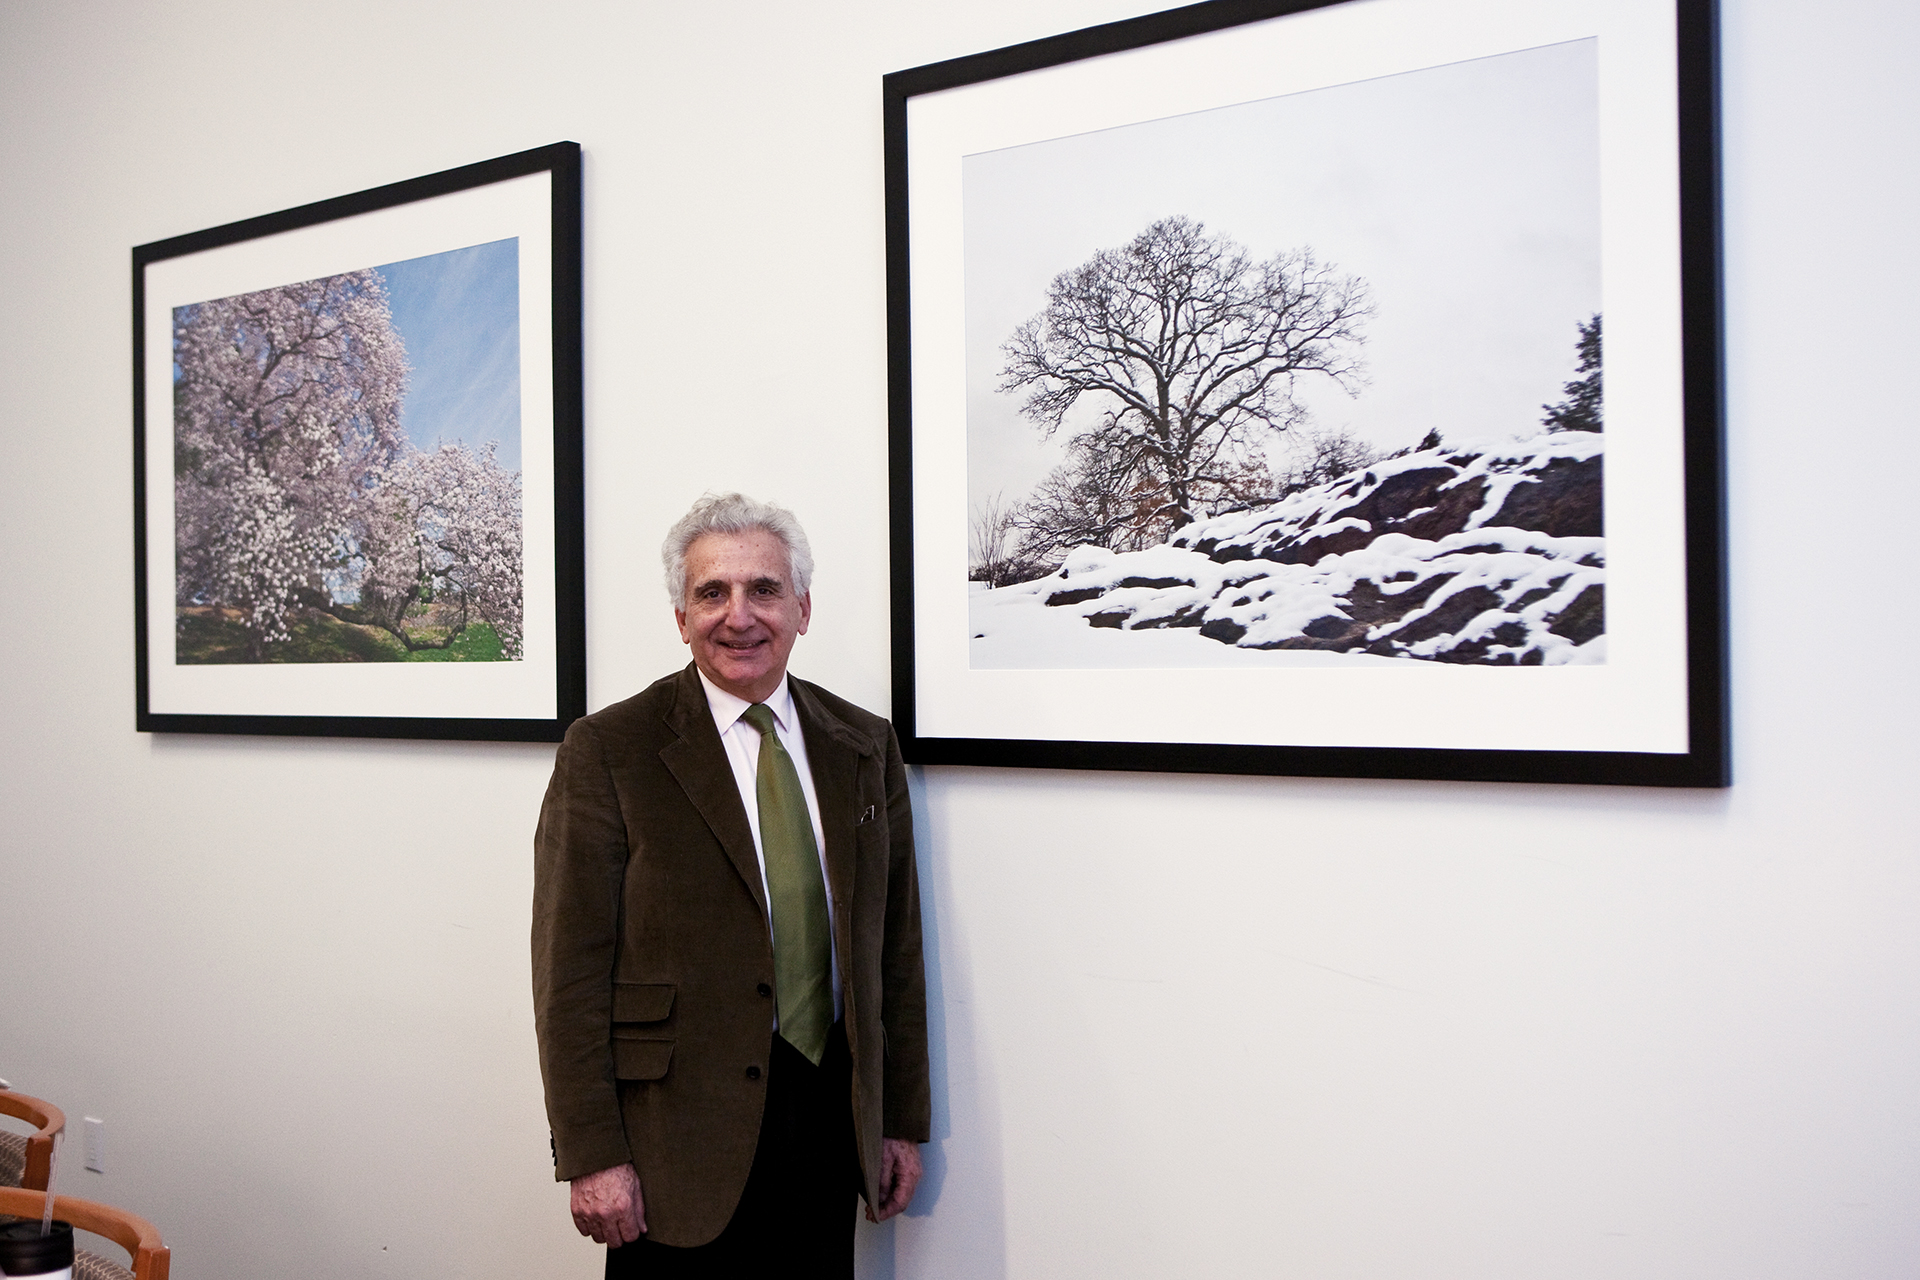 Lawrence Lederman standing in front of his photography